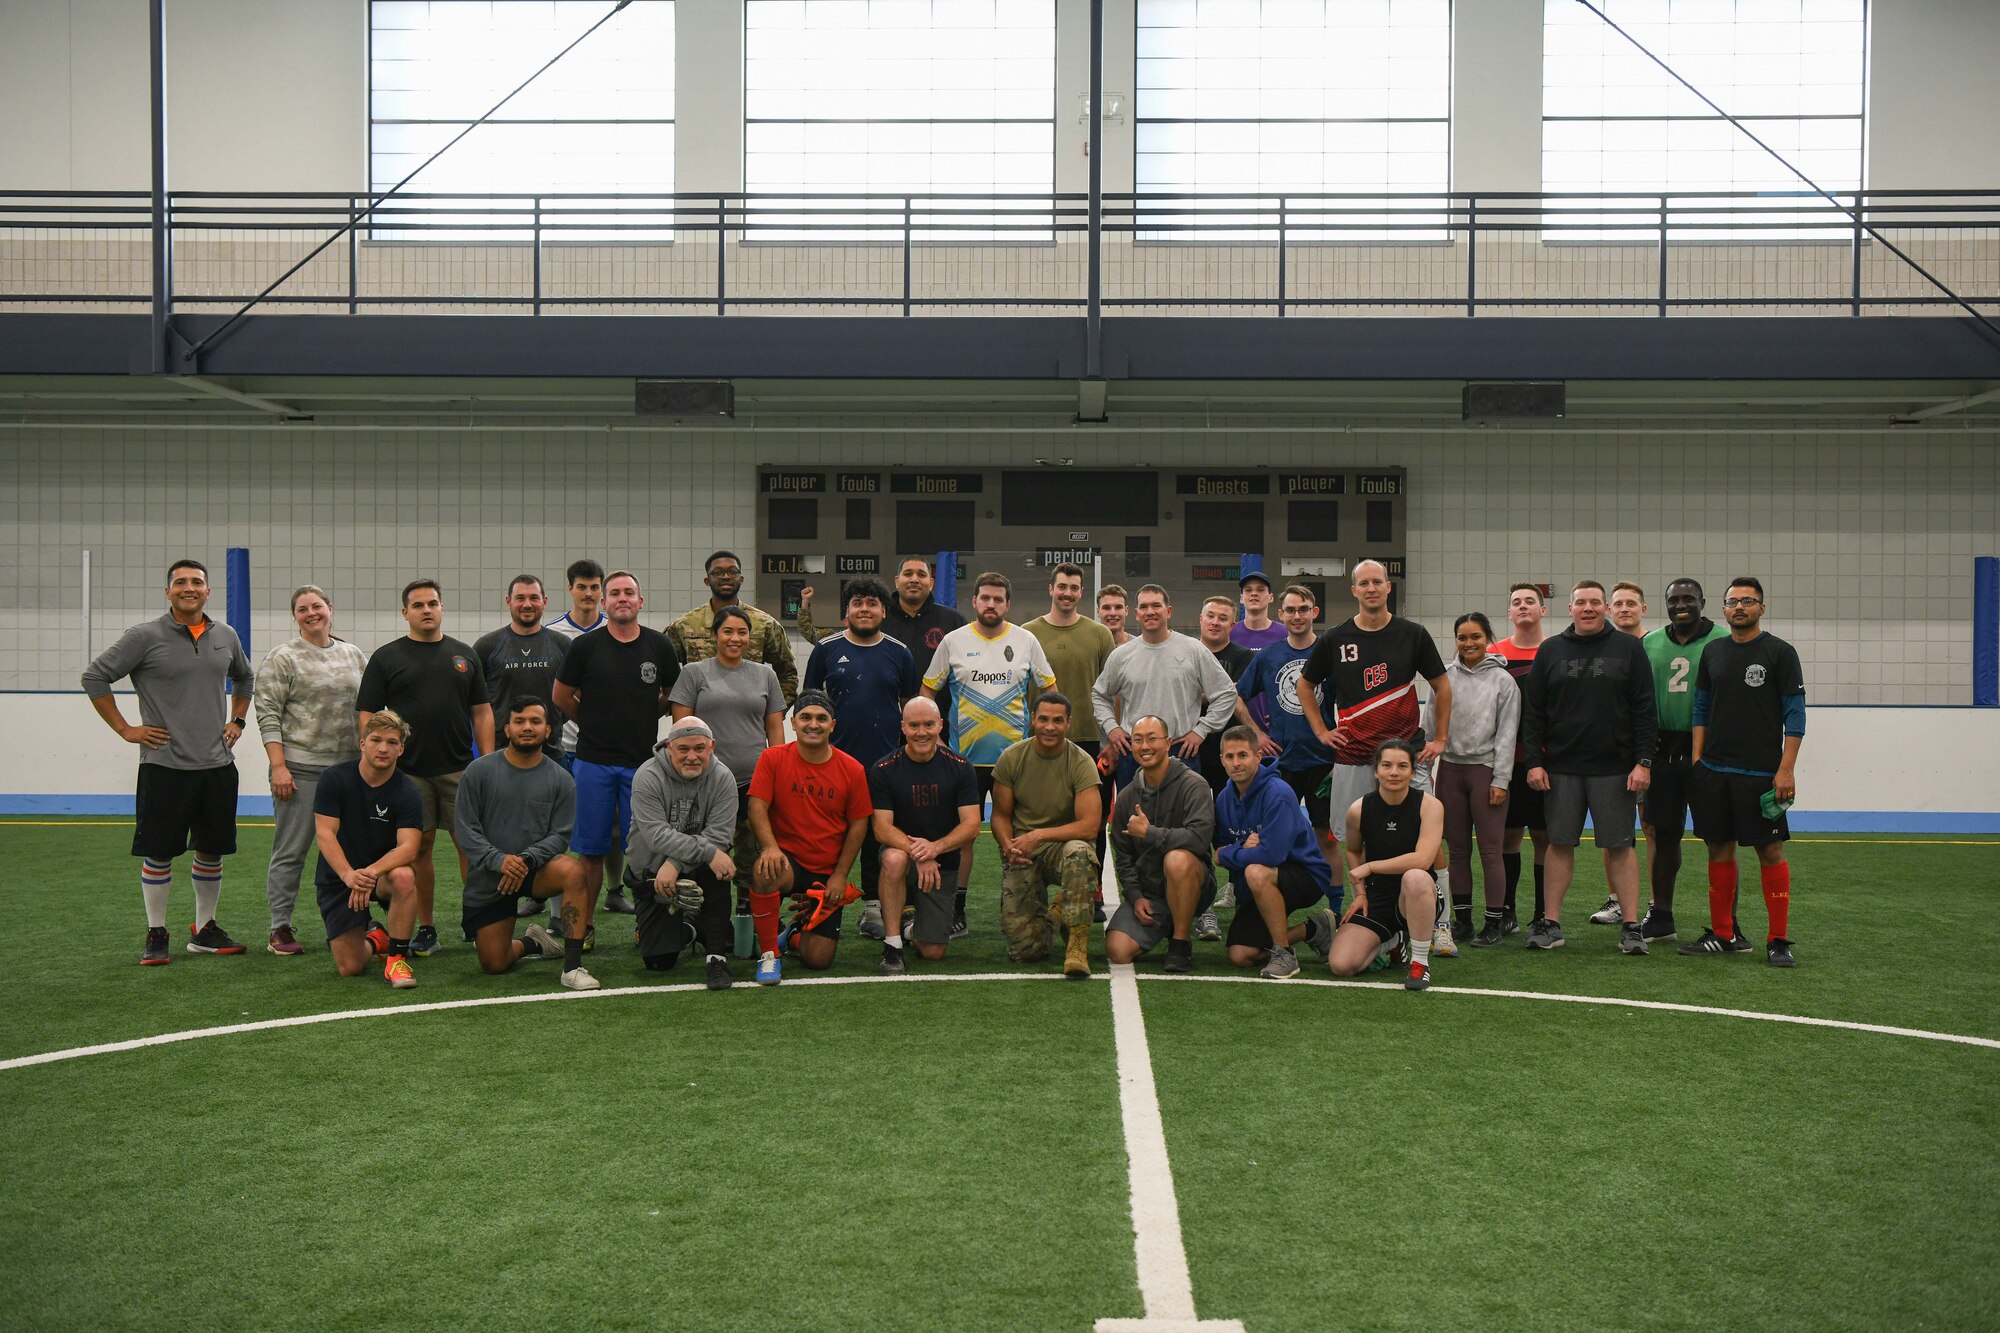 Members of the 319th Reconnaissance Wing pose for a photo Oct. 17, 2022, following the griffin challenge games at the fitness center field house on Grand Forks Air Force Base, North Dakota. The griffin challenge games are competition events between airmen and base leadership meant to boost morale and build camaraderie. (U.S. Air Force photo by Senior Airman Ashley Richards)